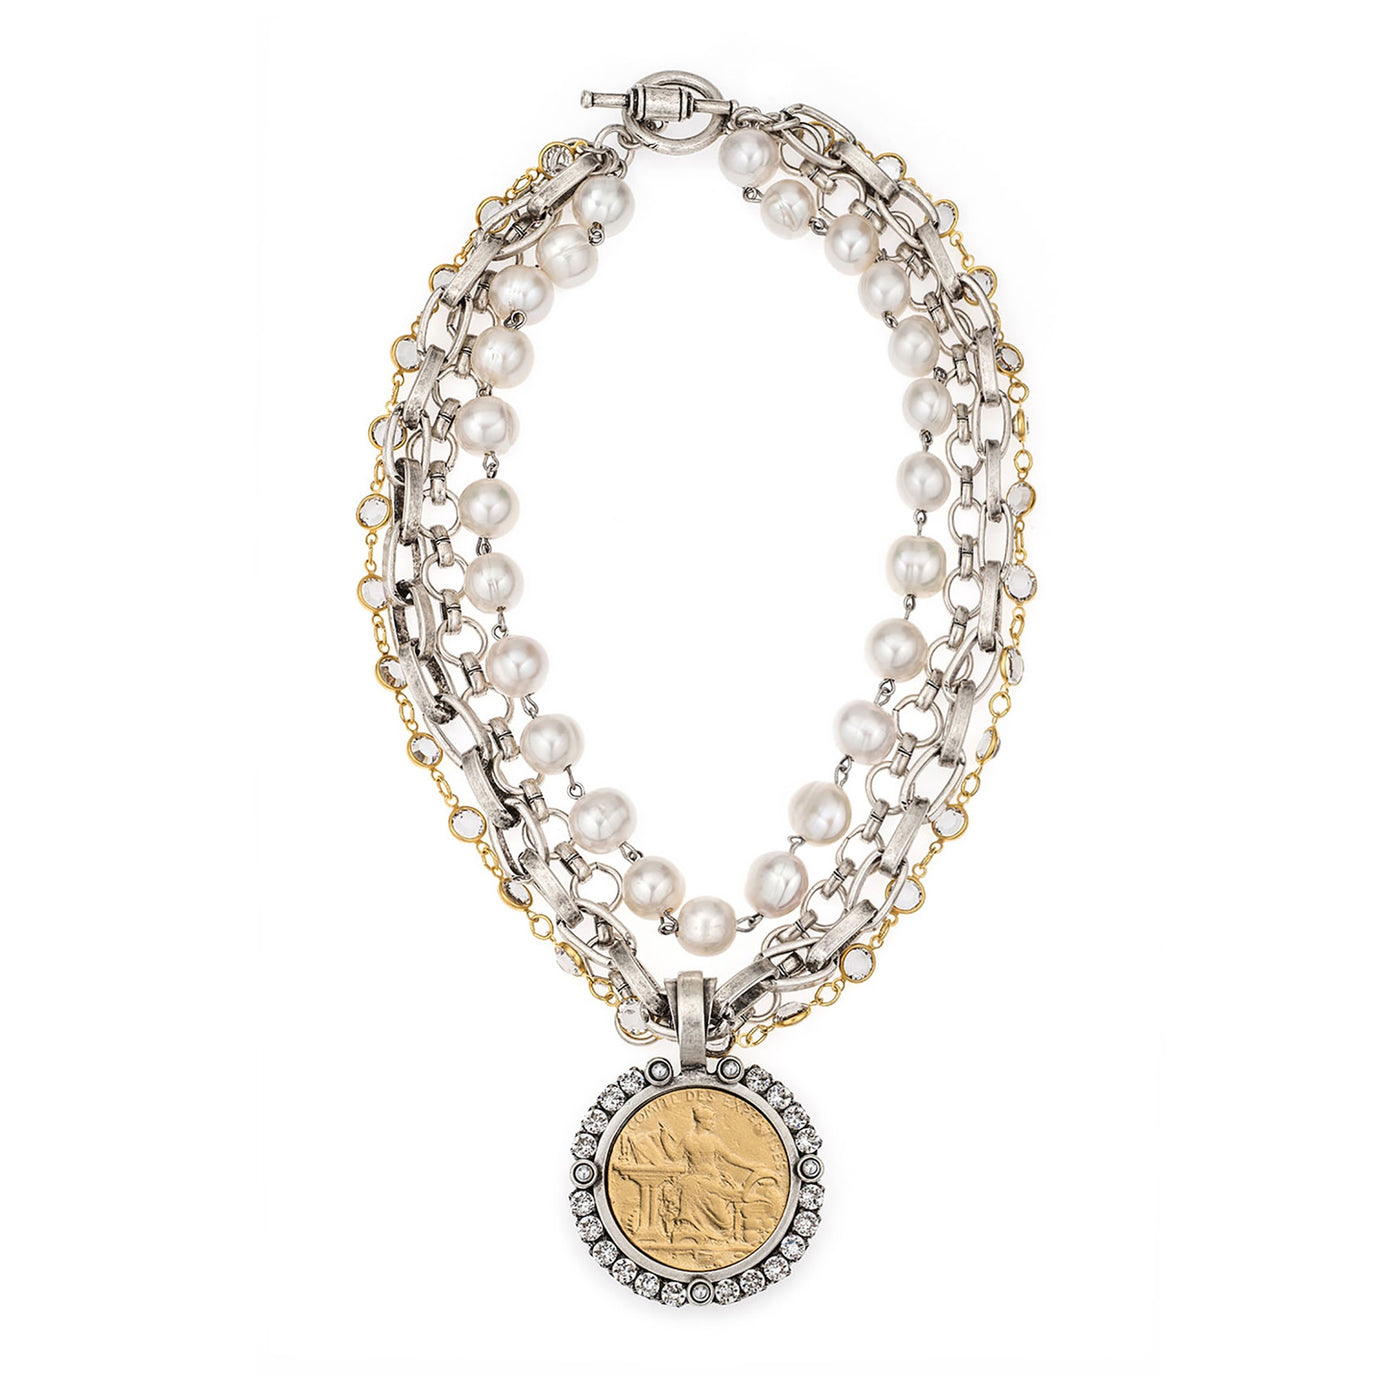 16" Four-Strand Pearl & Chain Necklace with 24k Comite Medallion